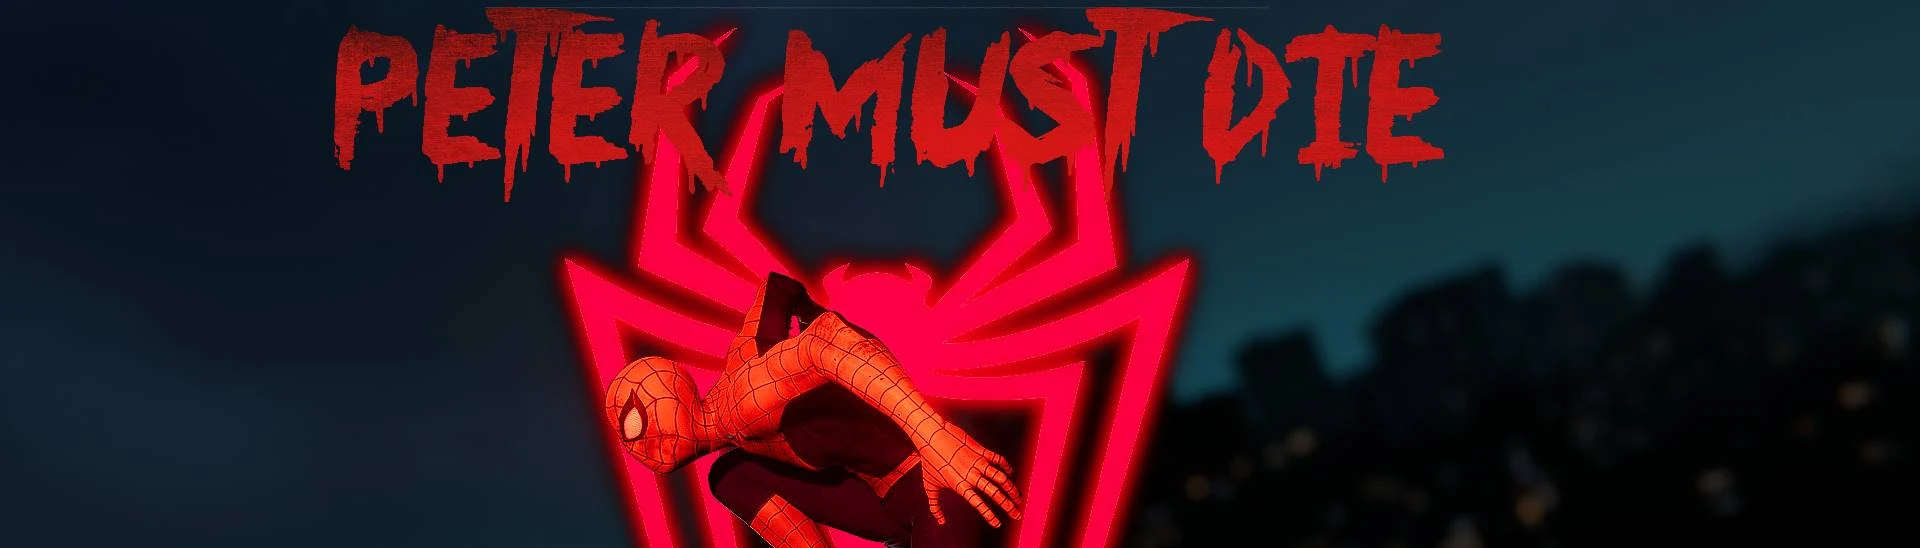 Spider-Man doesn't kill at Marvel's Spider-Man Remastered Nexus - Mods and  community